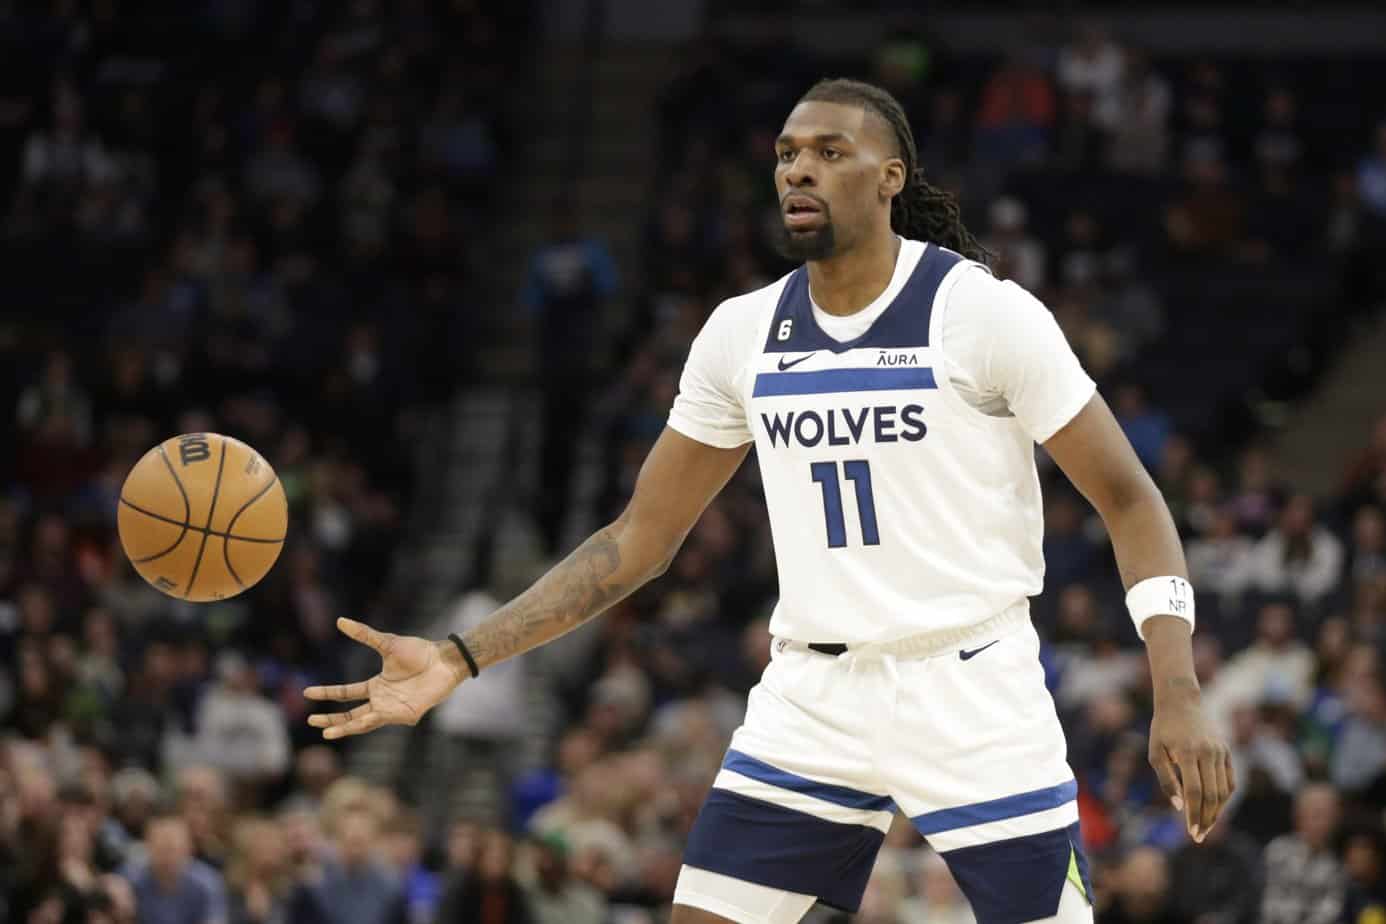 NBA DFS picks and projections today and leverage considerations for Monday include Naz Reid in a great spot against Minnesota...